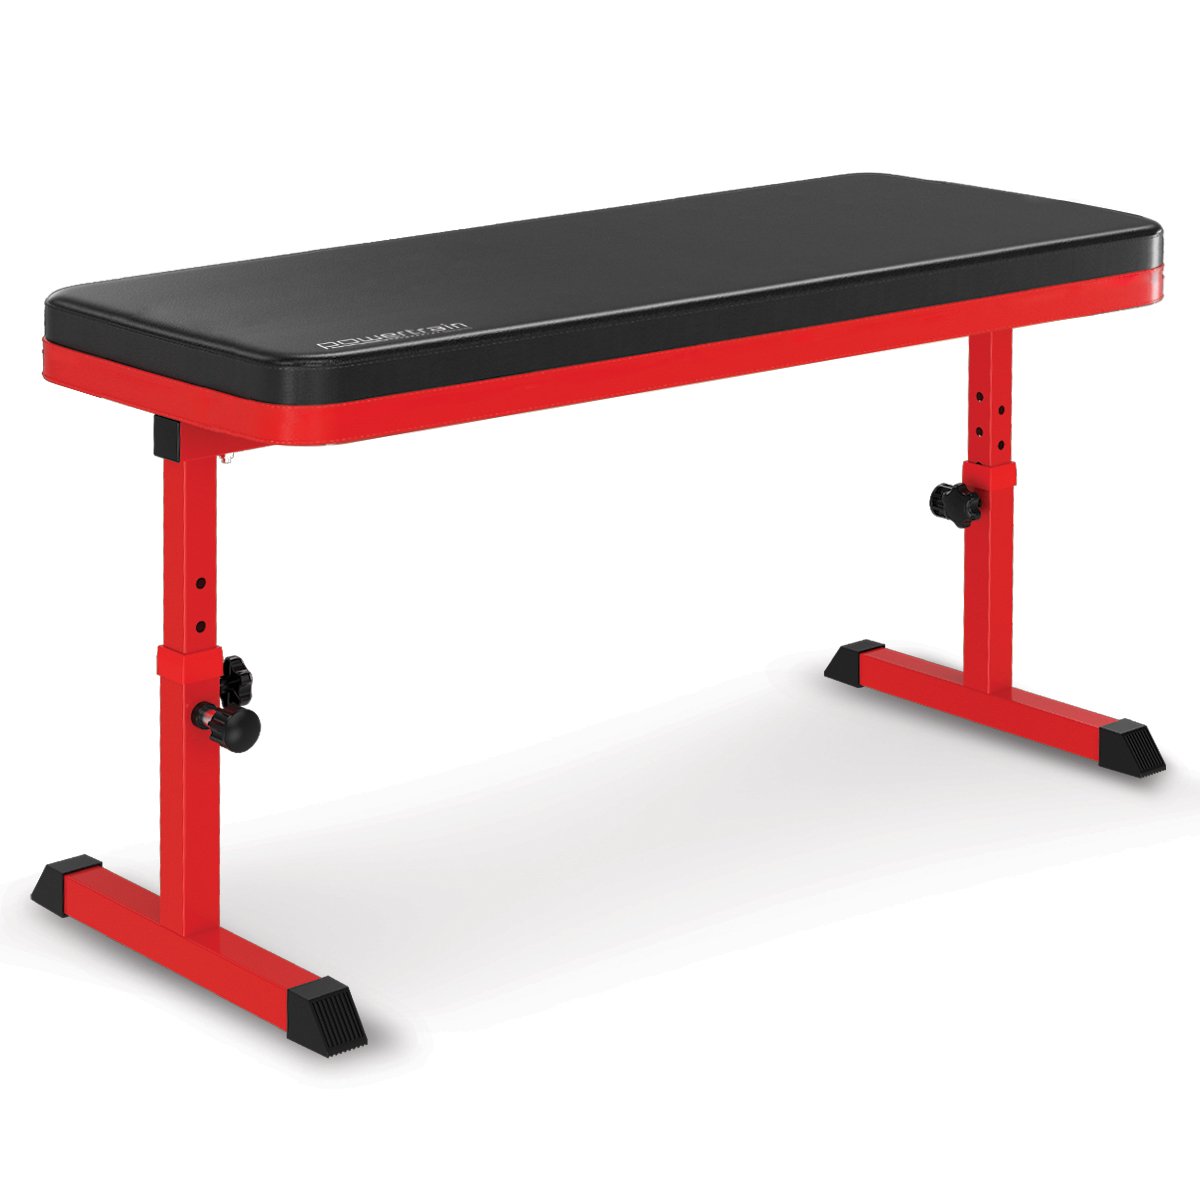 Powertrain Height-Adjustable Exercise Home Gym Flat Weight Bench - SILBERSHELL